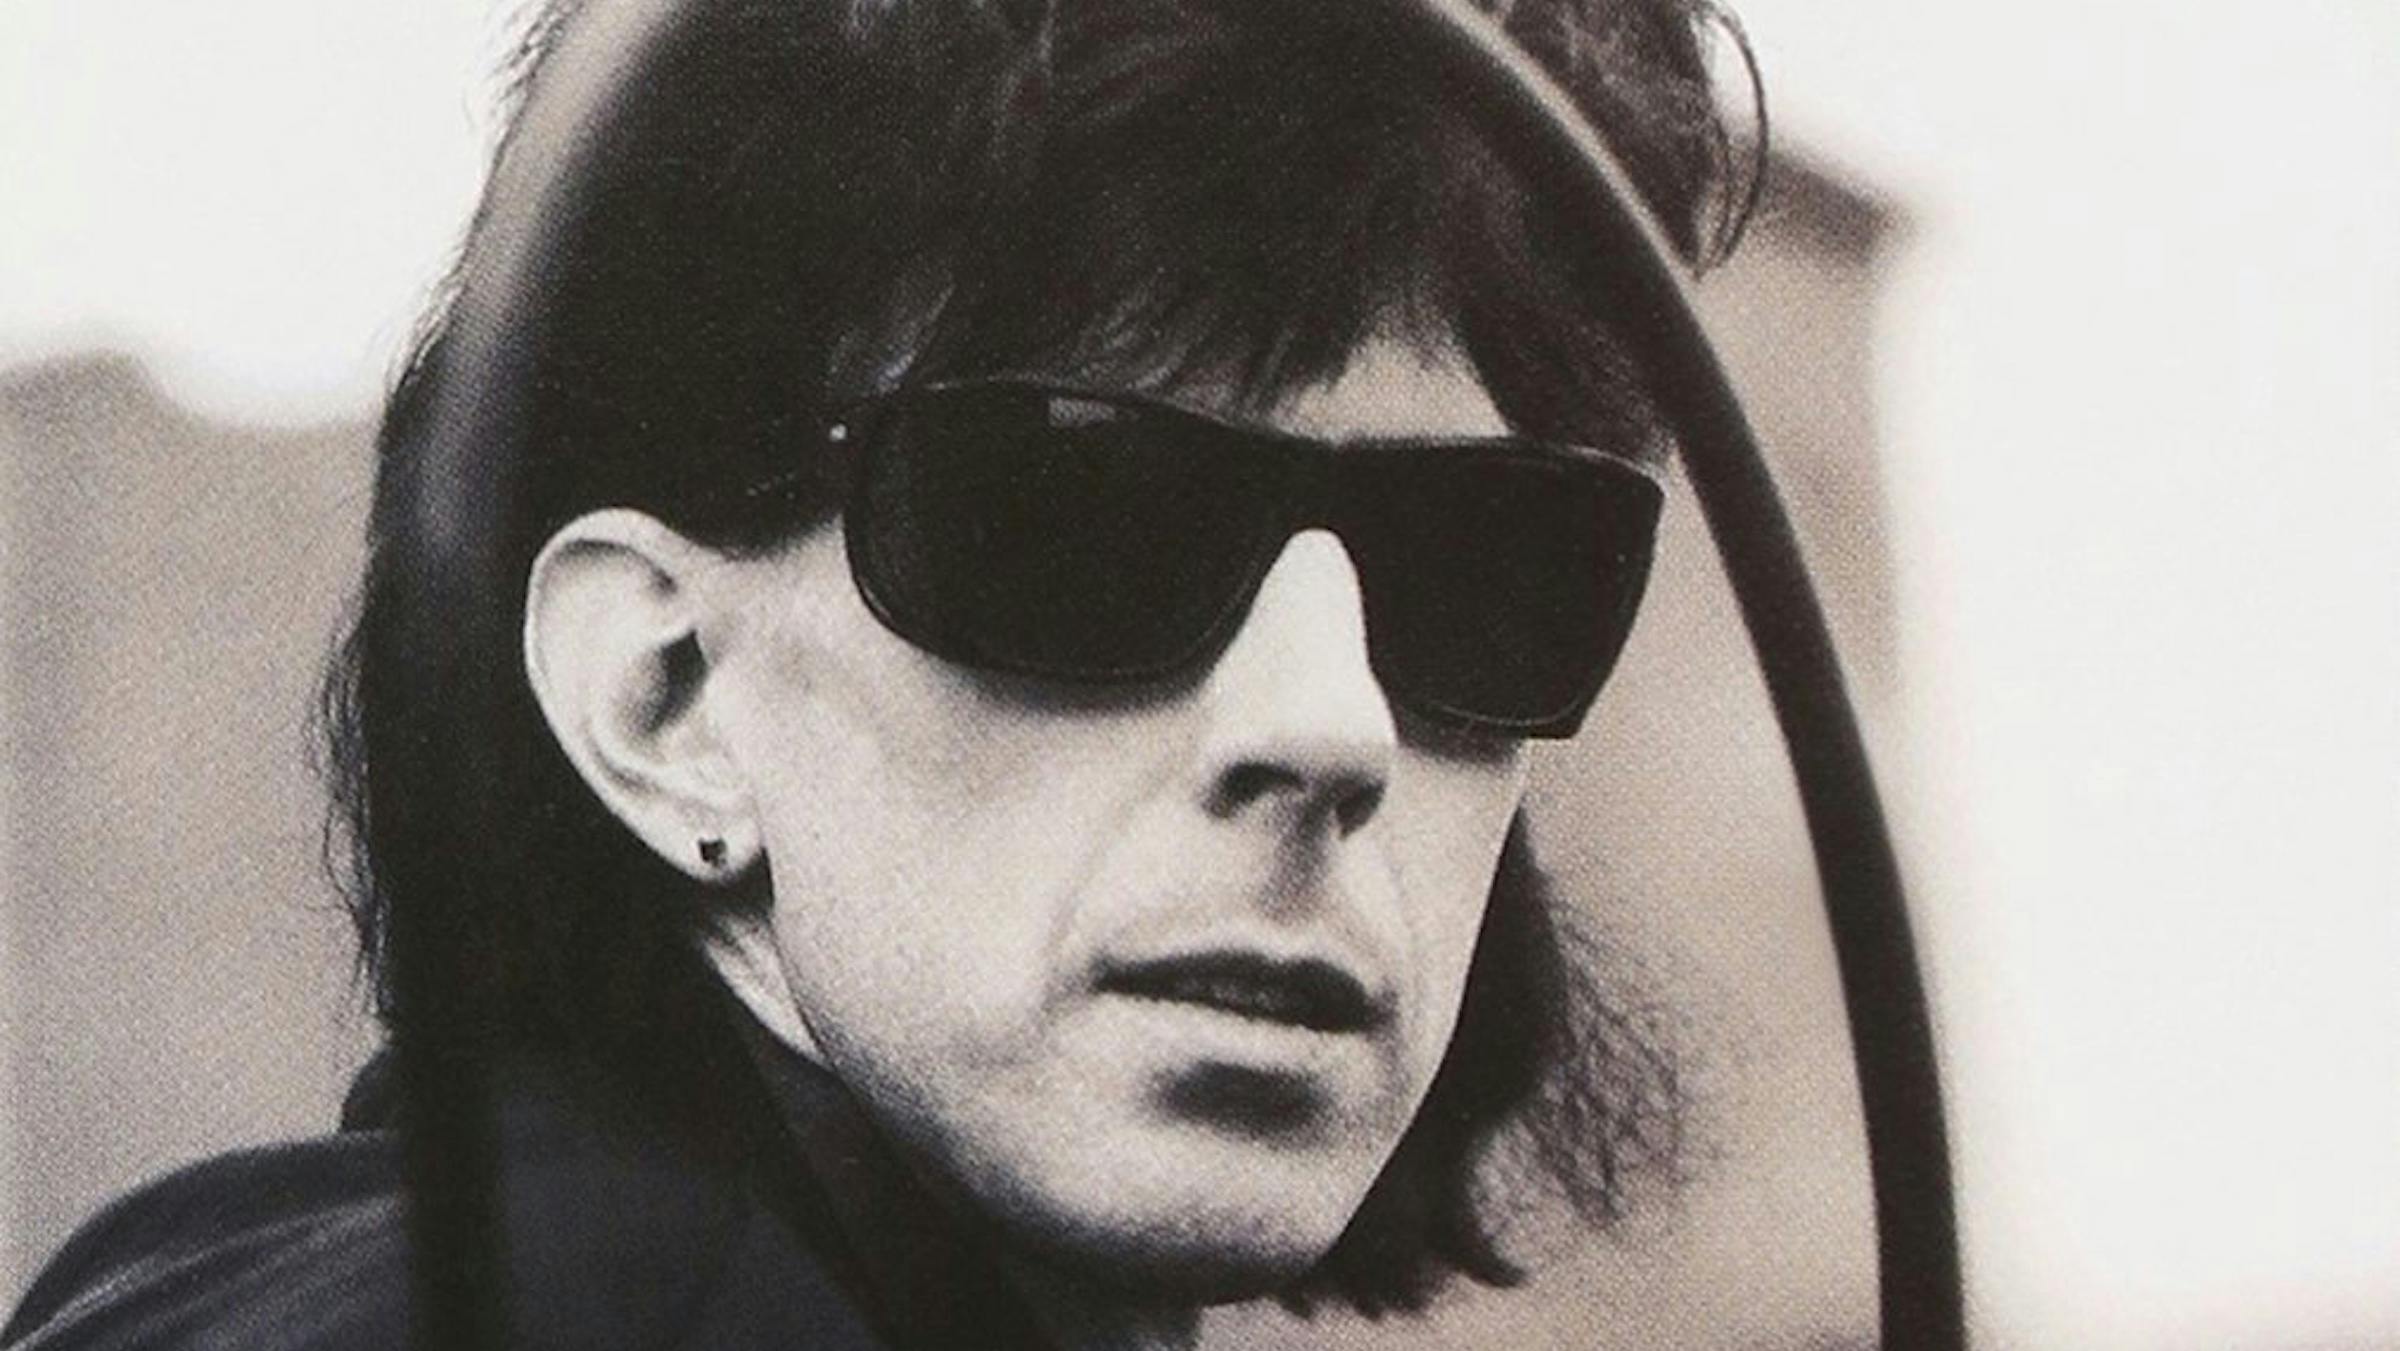 "Sail On, Uncle Ricky": The Rock World Pays Tribute To The Cars' Ric Ocasek